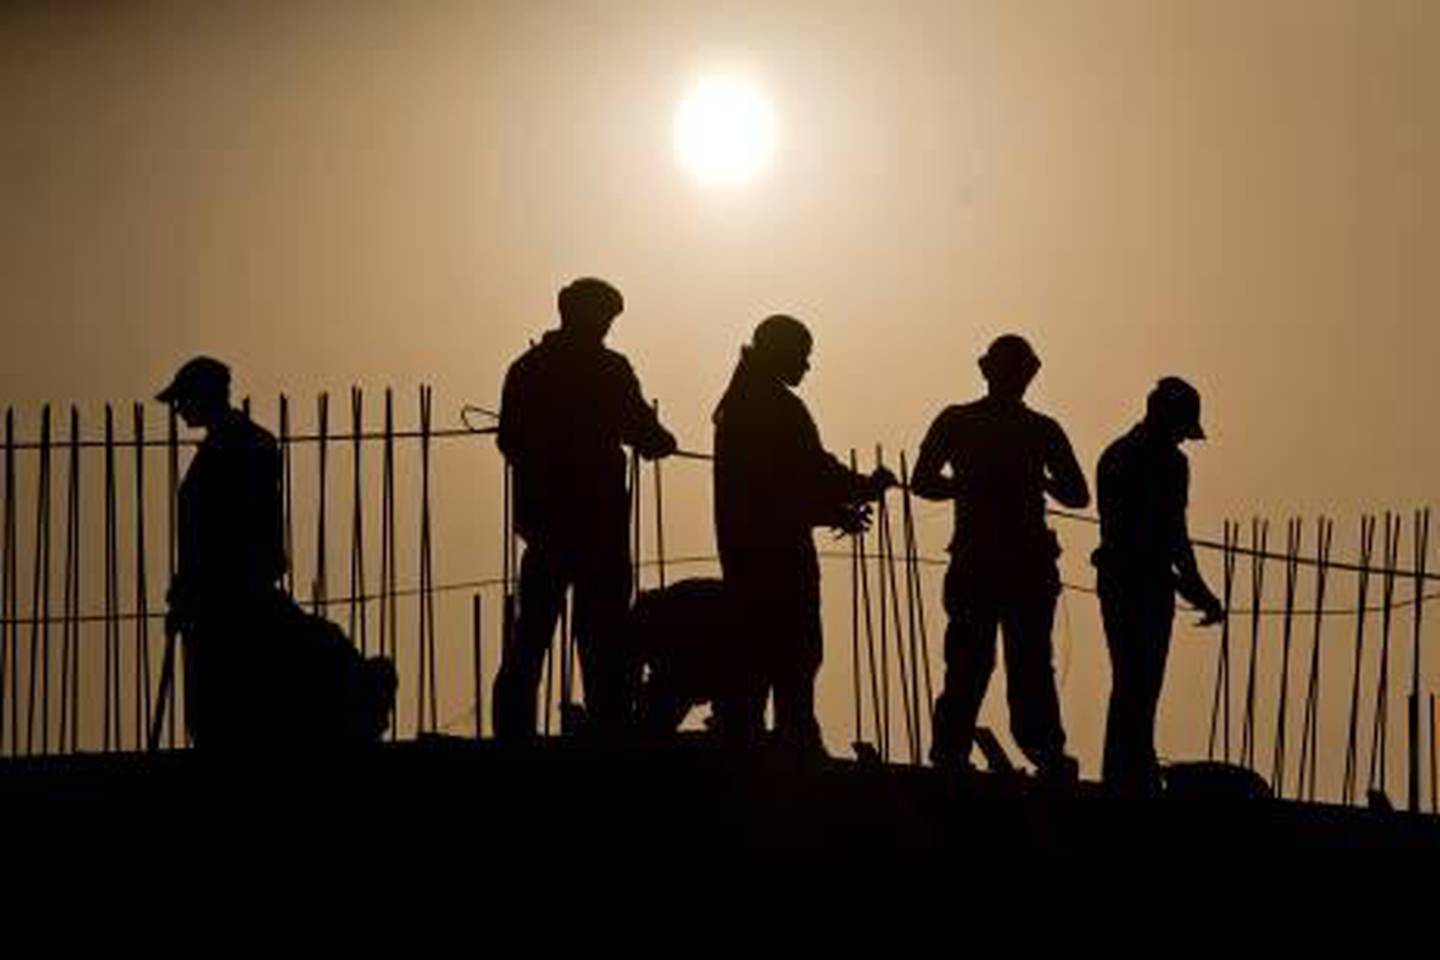 Ras al Khaimah - September 8, 2009 - Construction continues on a retail shopping building as workers secure rebar on the project in Al Hamra Marina near Ras al Khaimah September 8, 2009. (Photo by Jeff Topping/The National)  *** Local Caption ***  JT003-0908-RAK SUNSET WORKERS_MG_1442.jpg